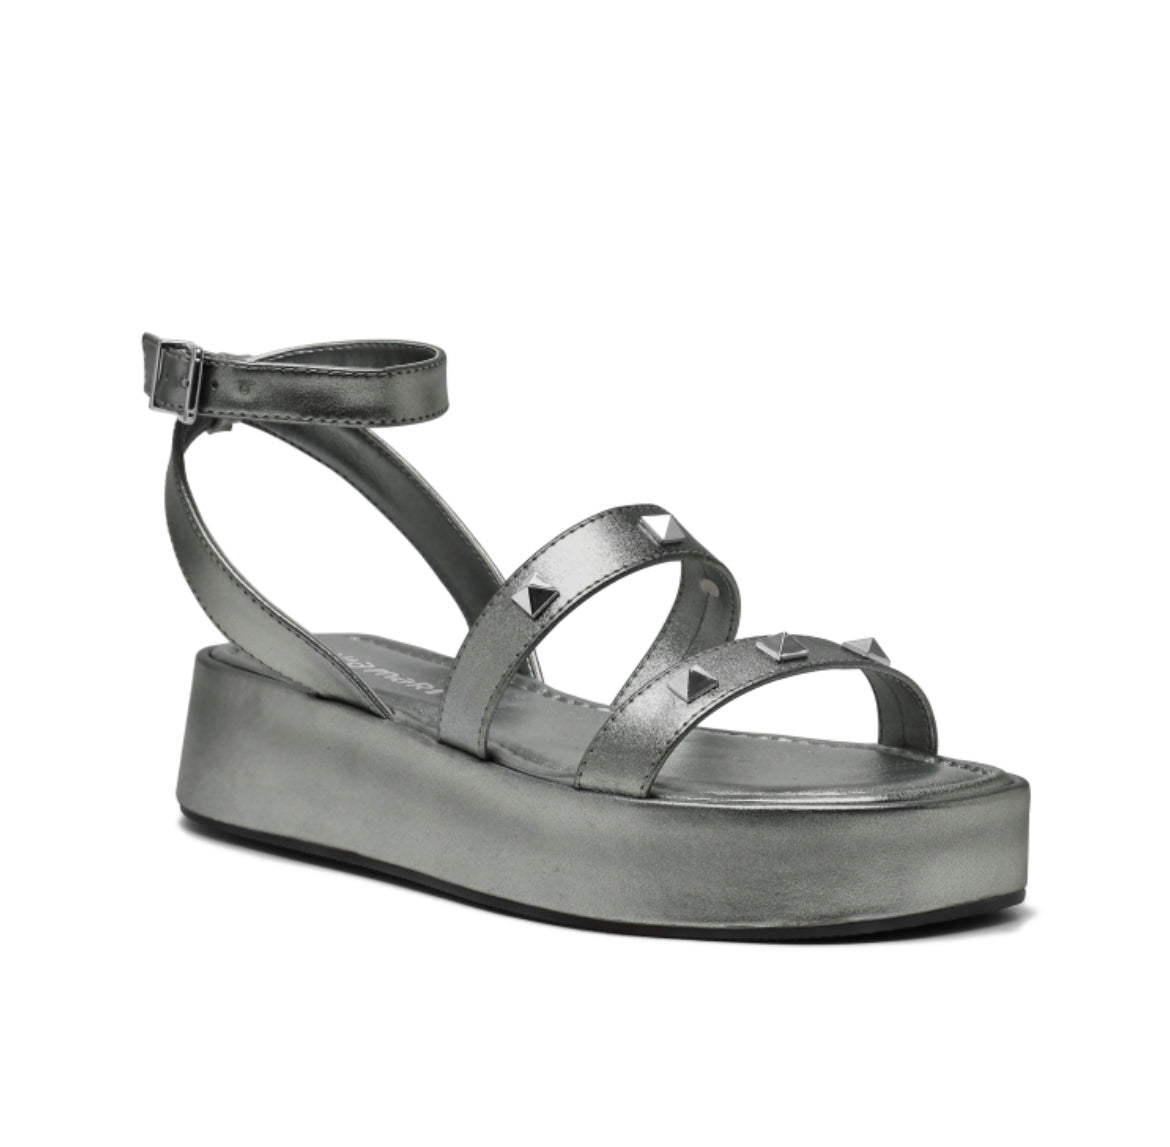 Aria studded pewter flat